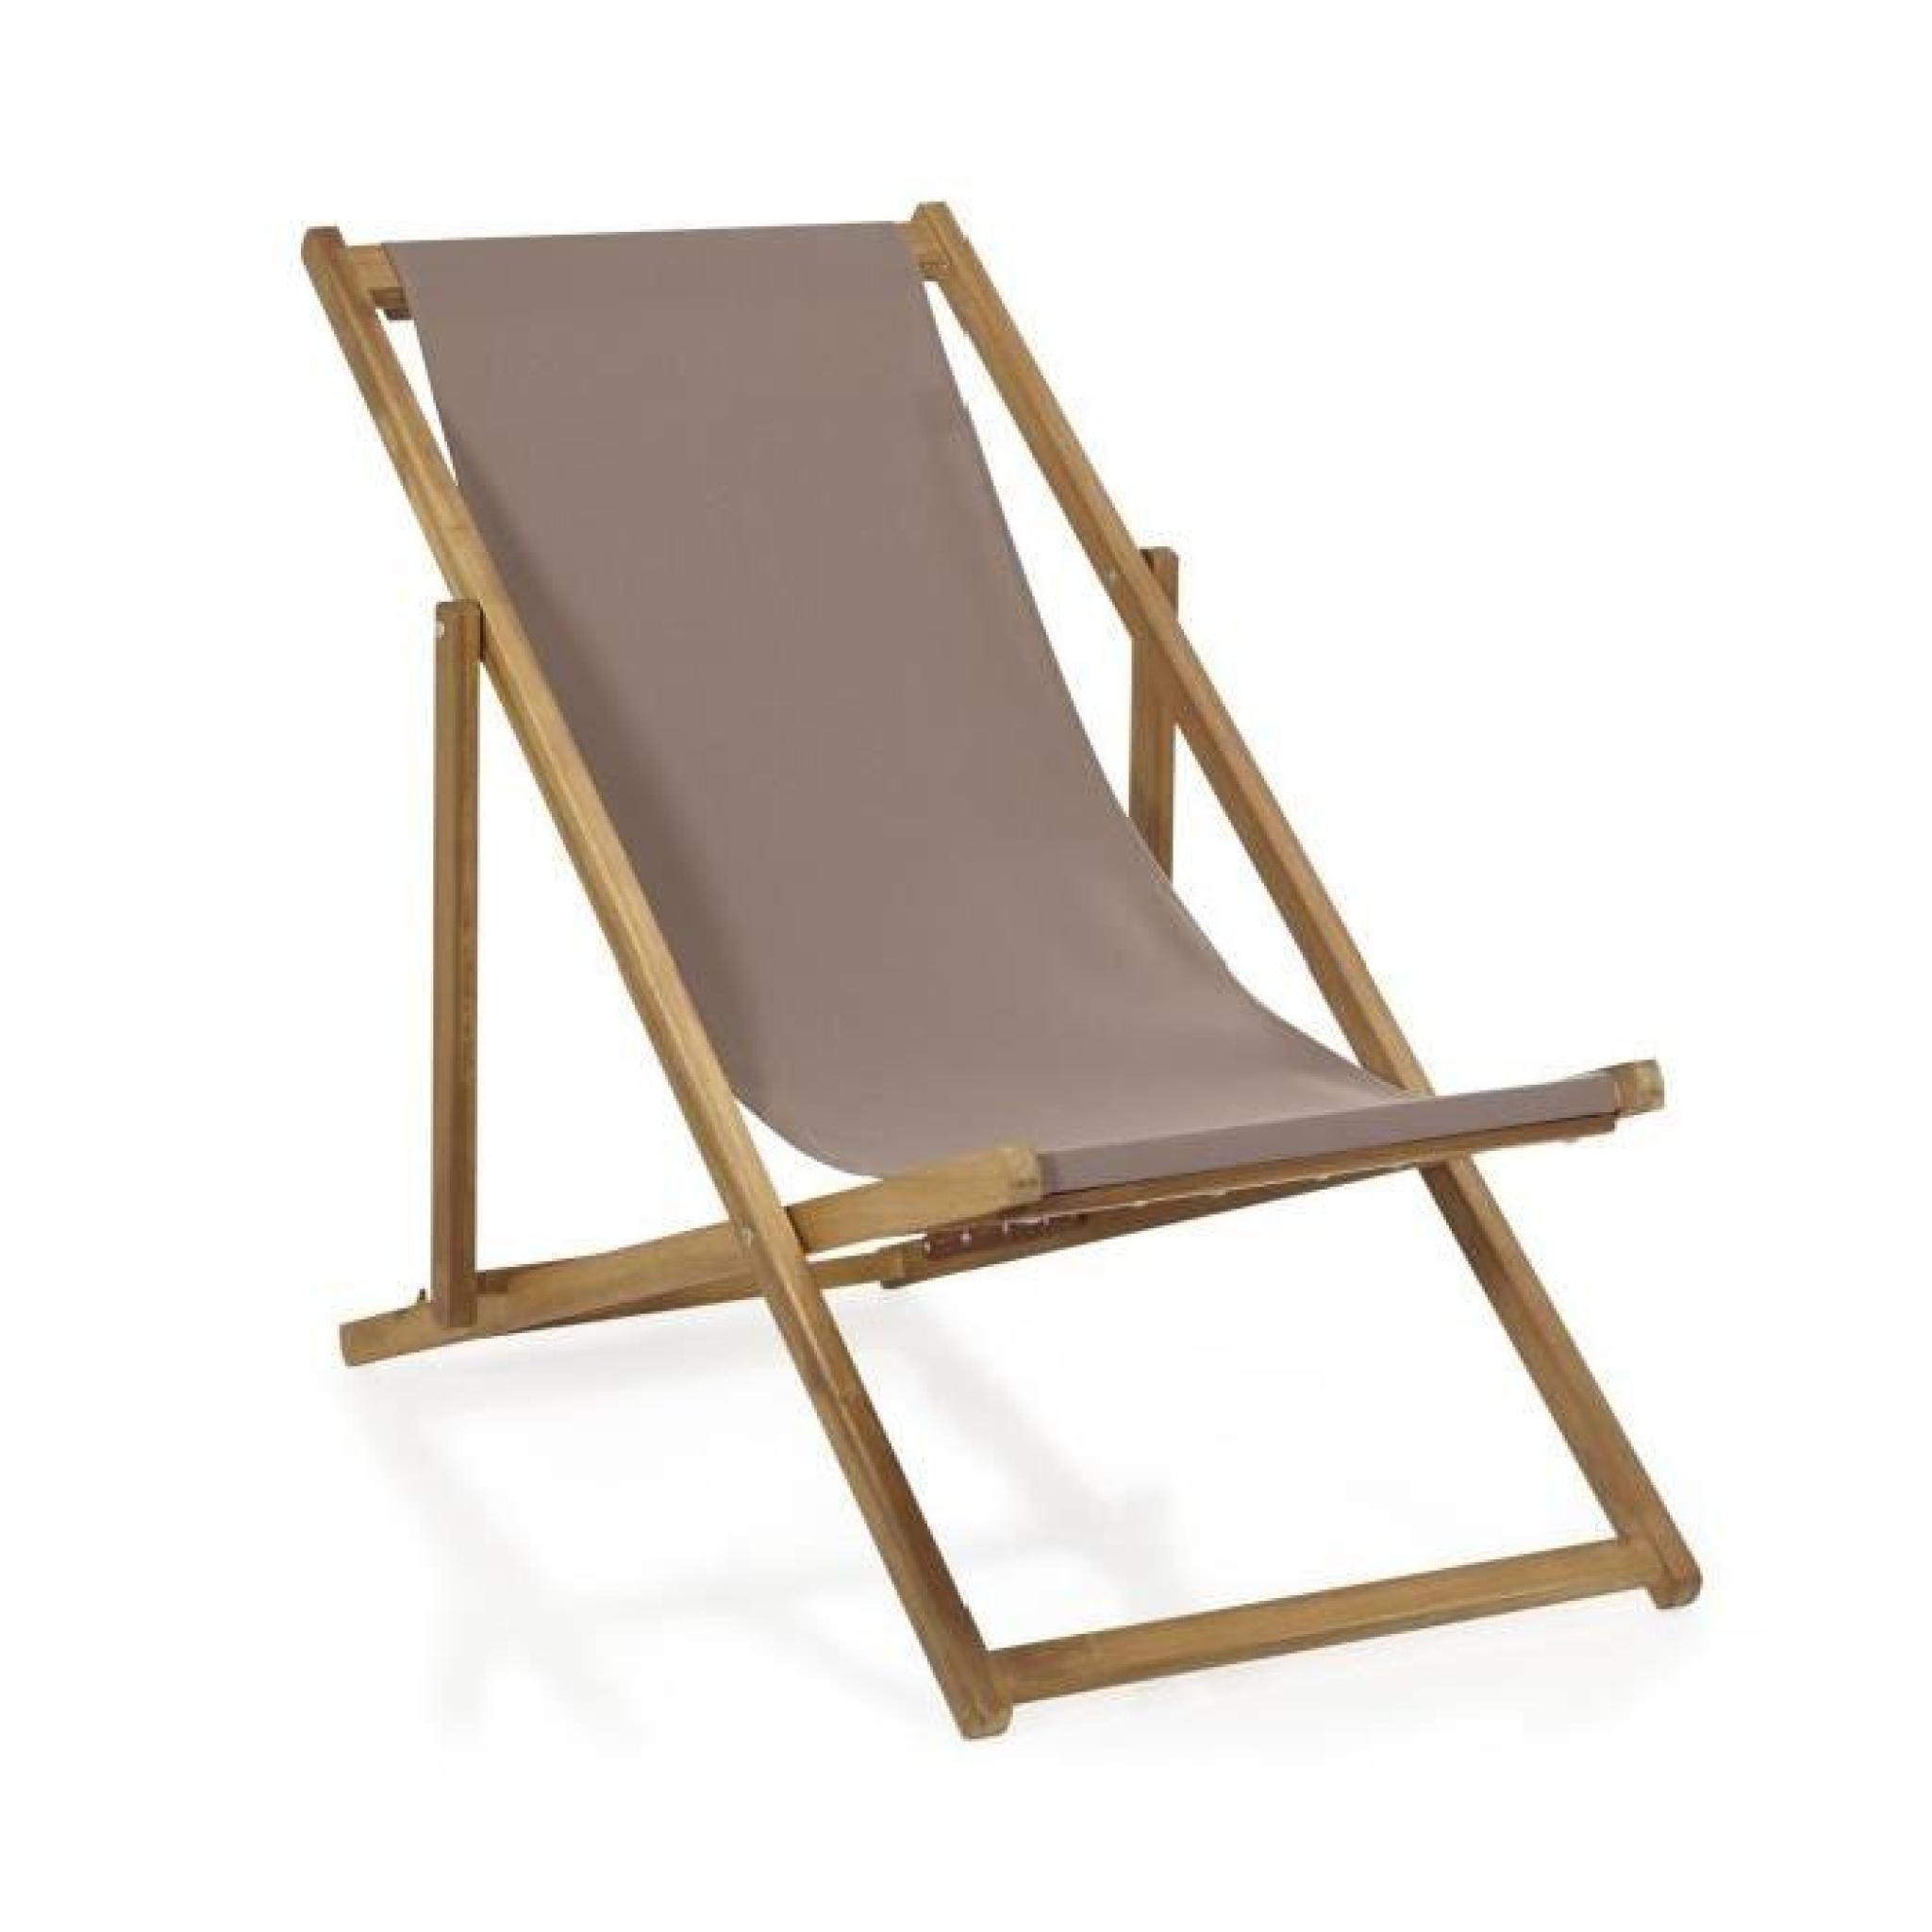 Udine Chilienne / Chaise longue de jardin taupe - Taupe pas cher